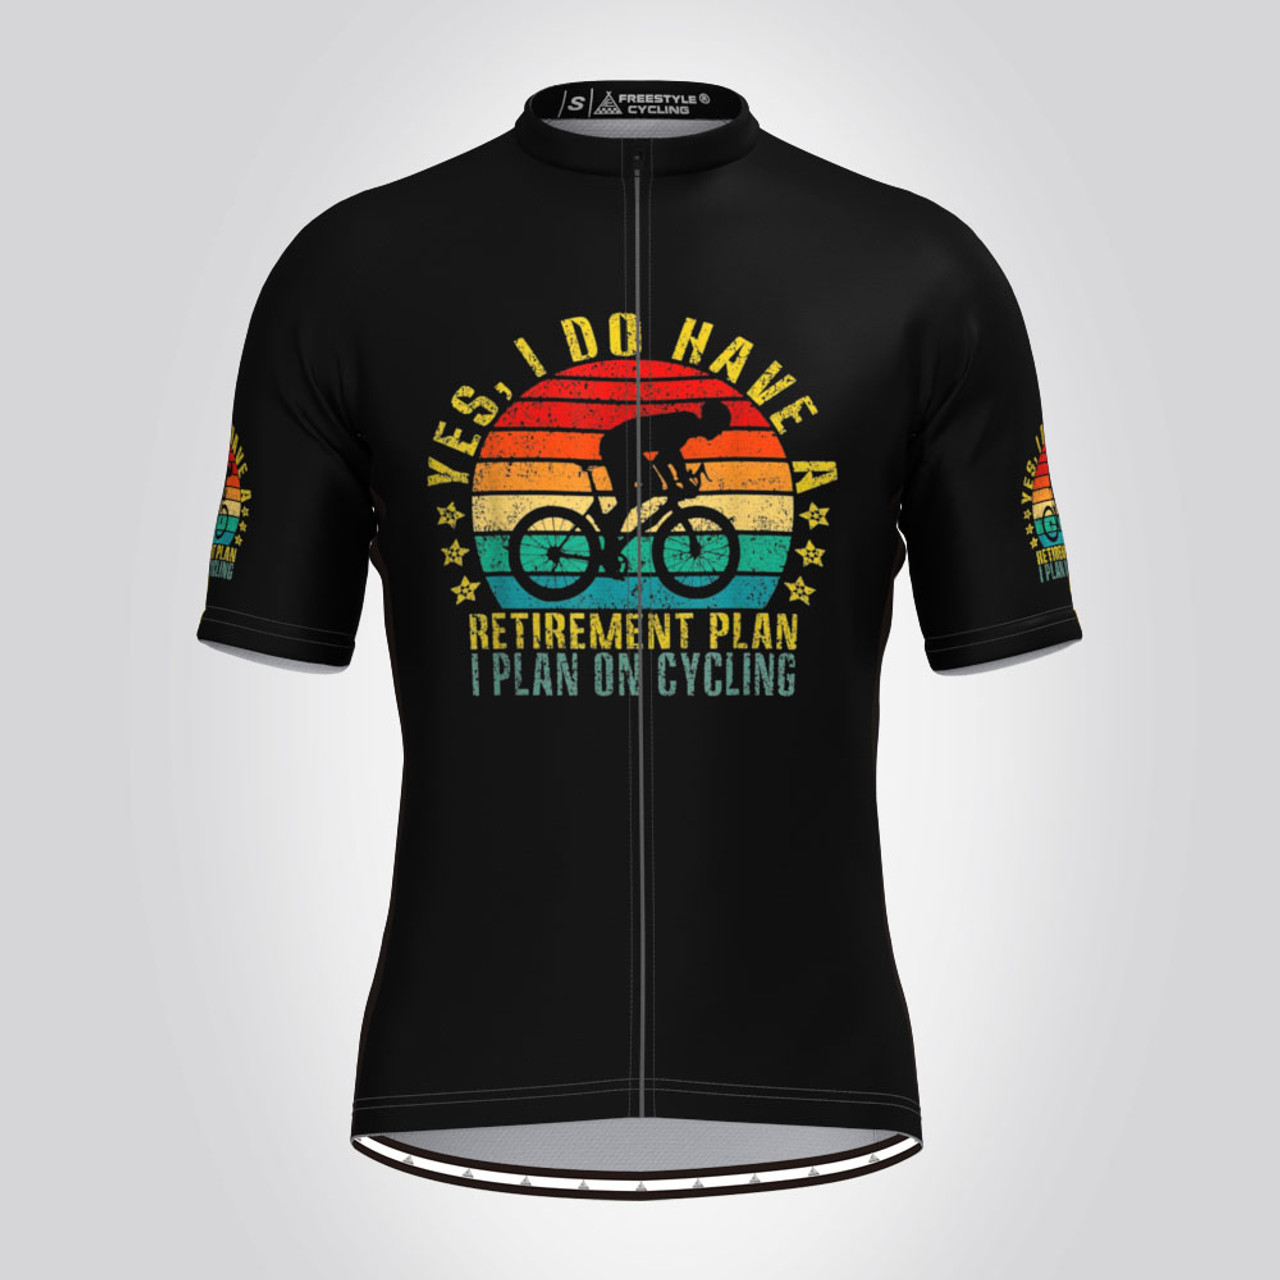 I Plan On Cycling Vintage Men's Cycling Jersey - Freestylecycling.com